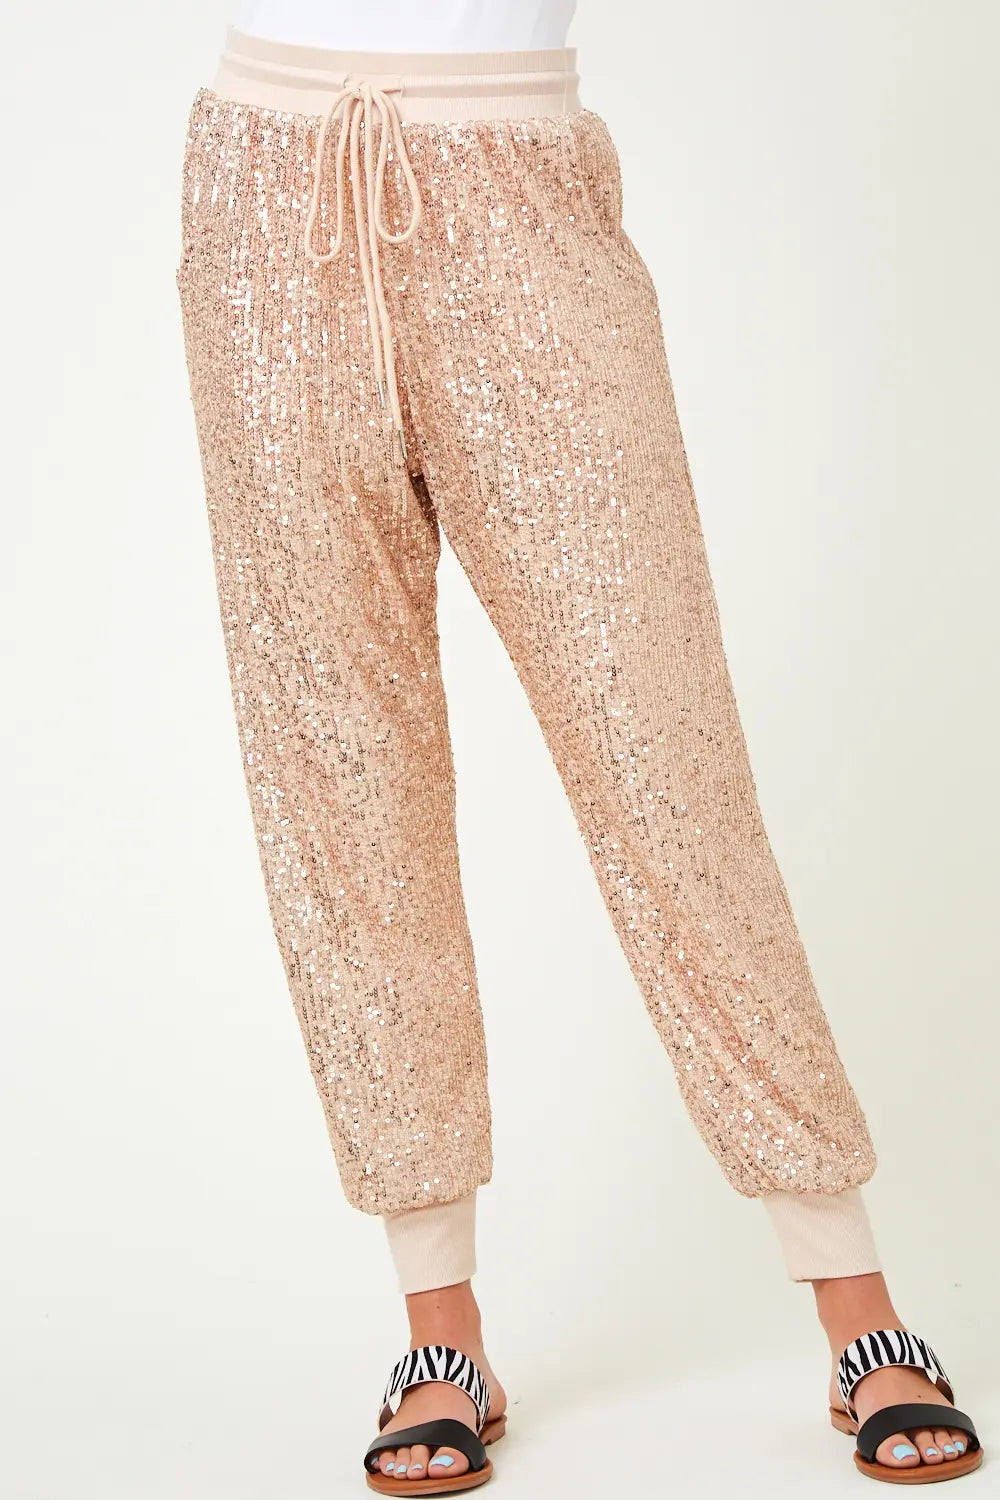 Stretchy Sequin Jogger Pants - Rose Gold